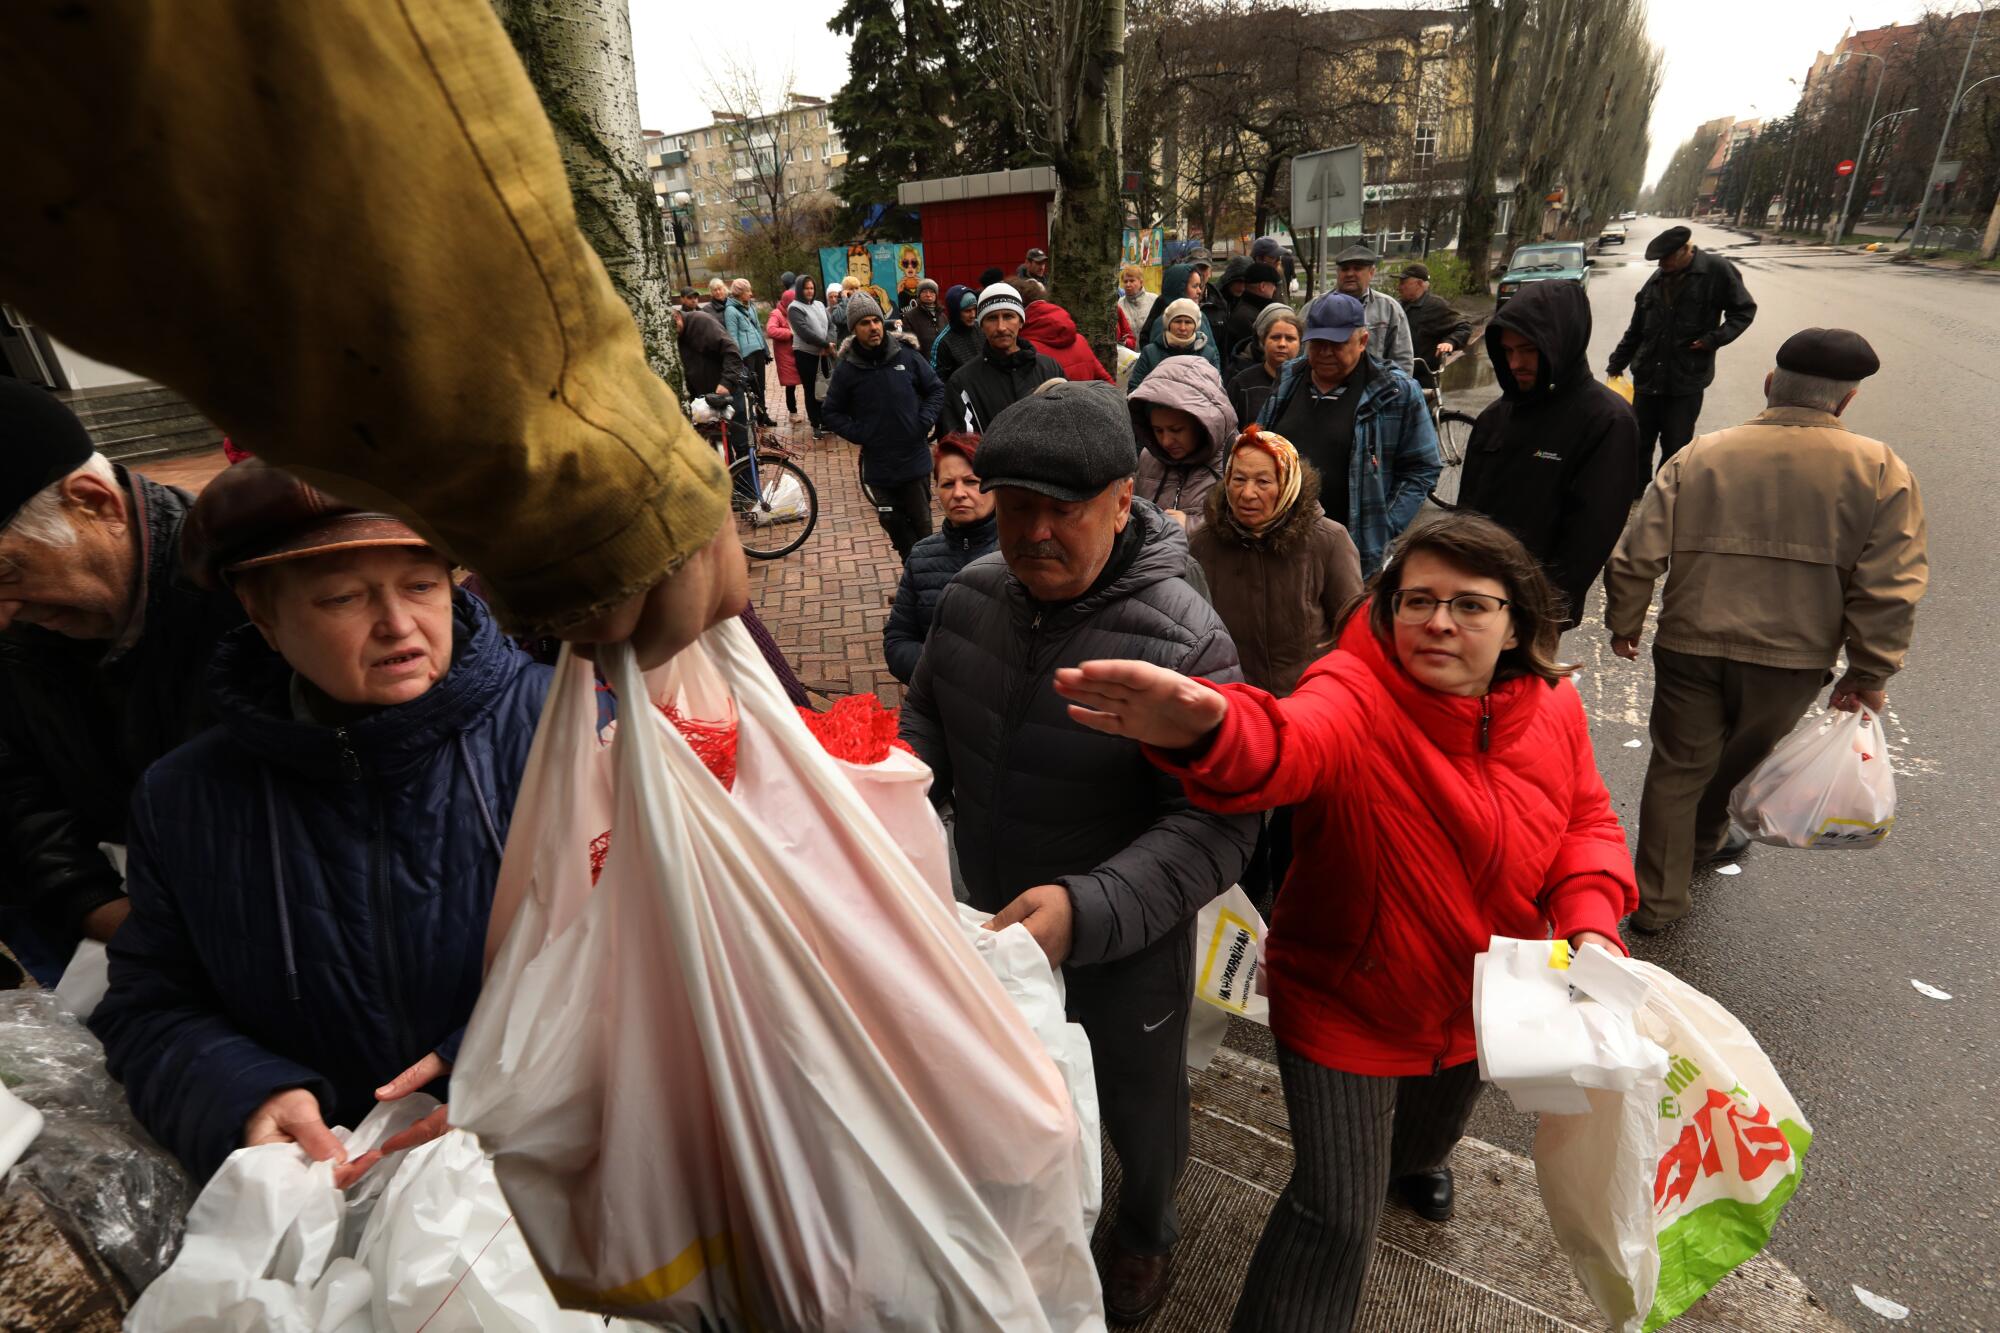 A food giveaway drew a long line of residents on a street.